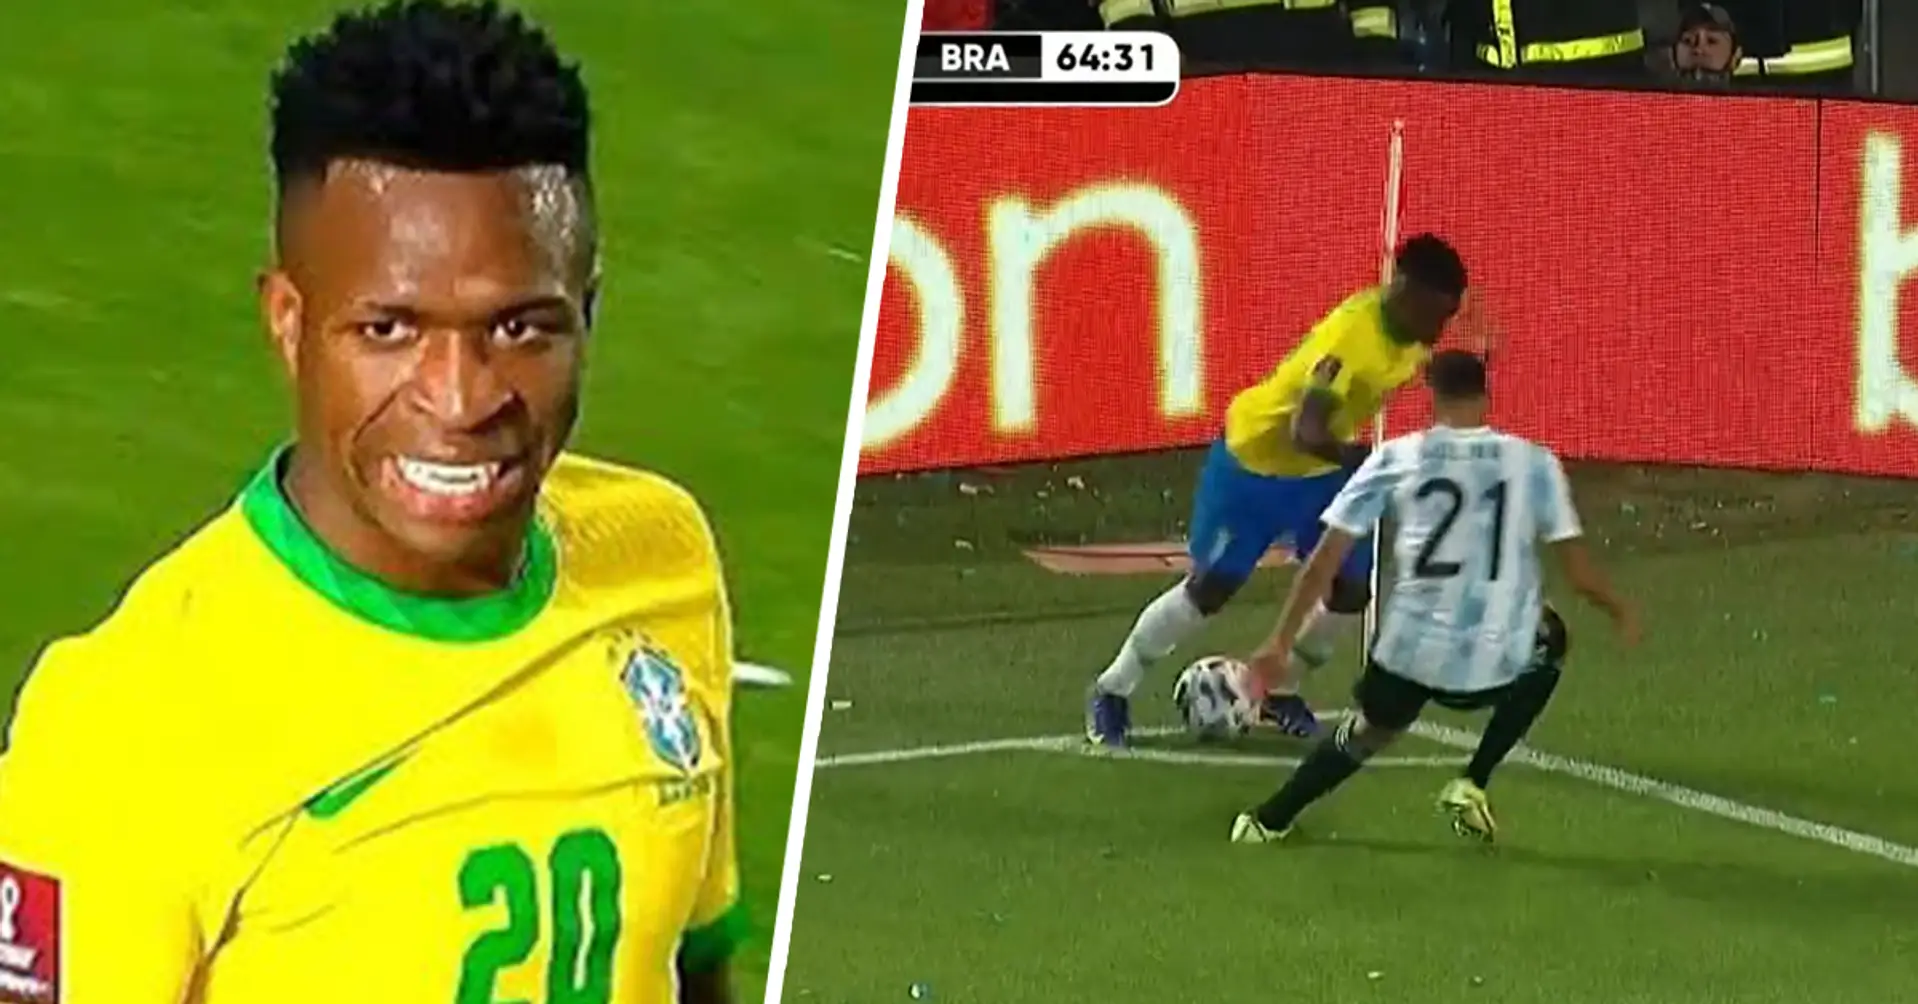 Vinicius Jr sends Argentina defender for a hot dog with incredible ‘Rainbow’ flick